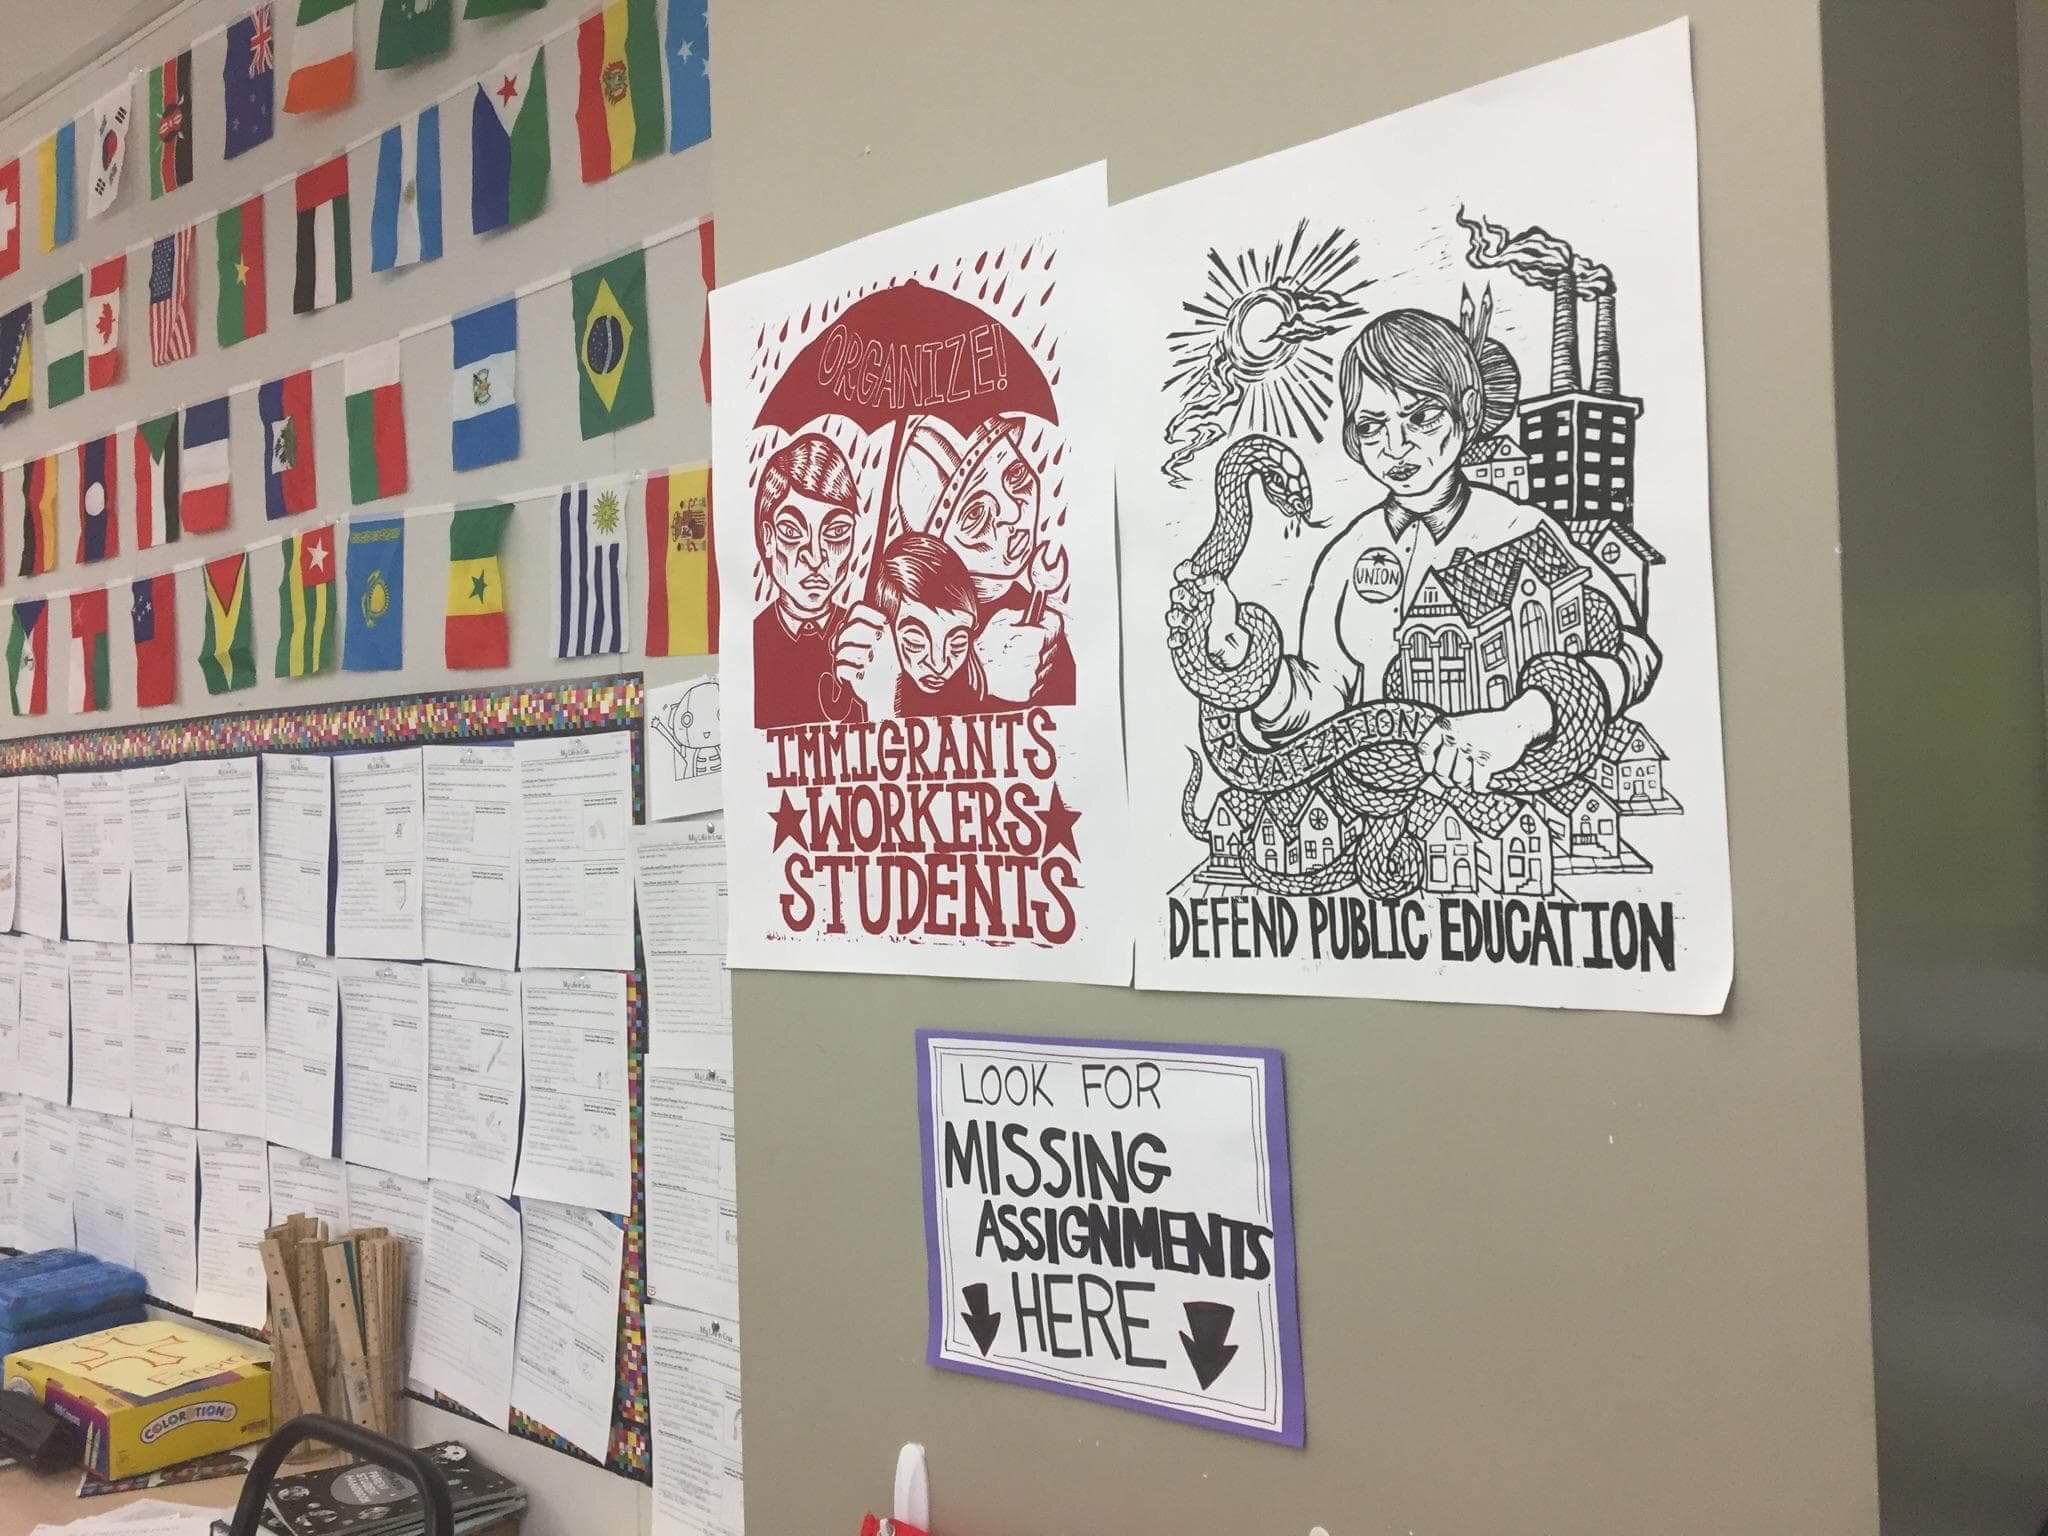  Posters on display in a Los Angeles classroom in the lead up to a strike.  